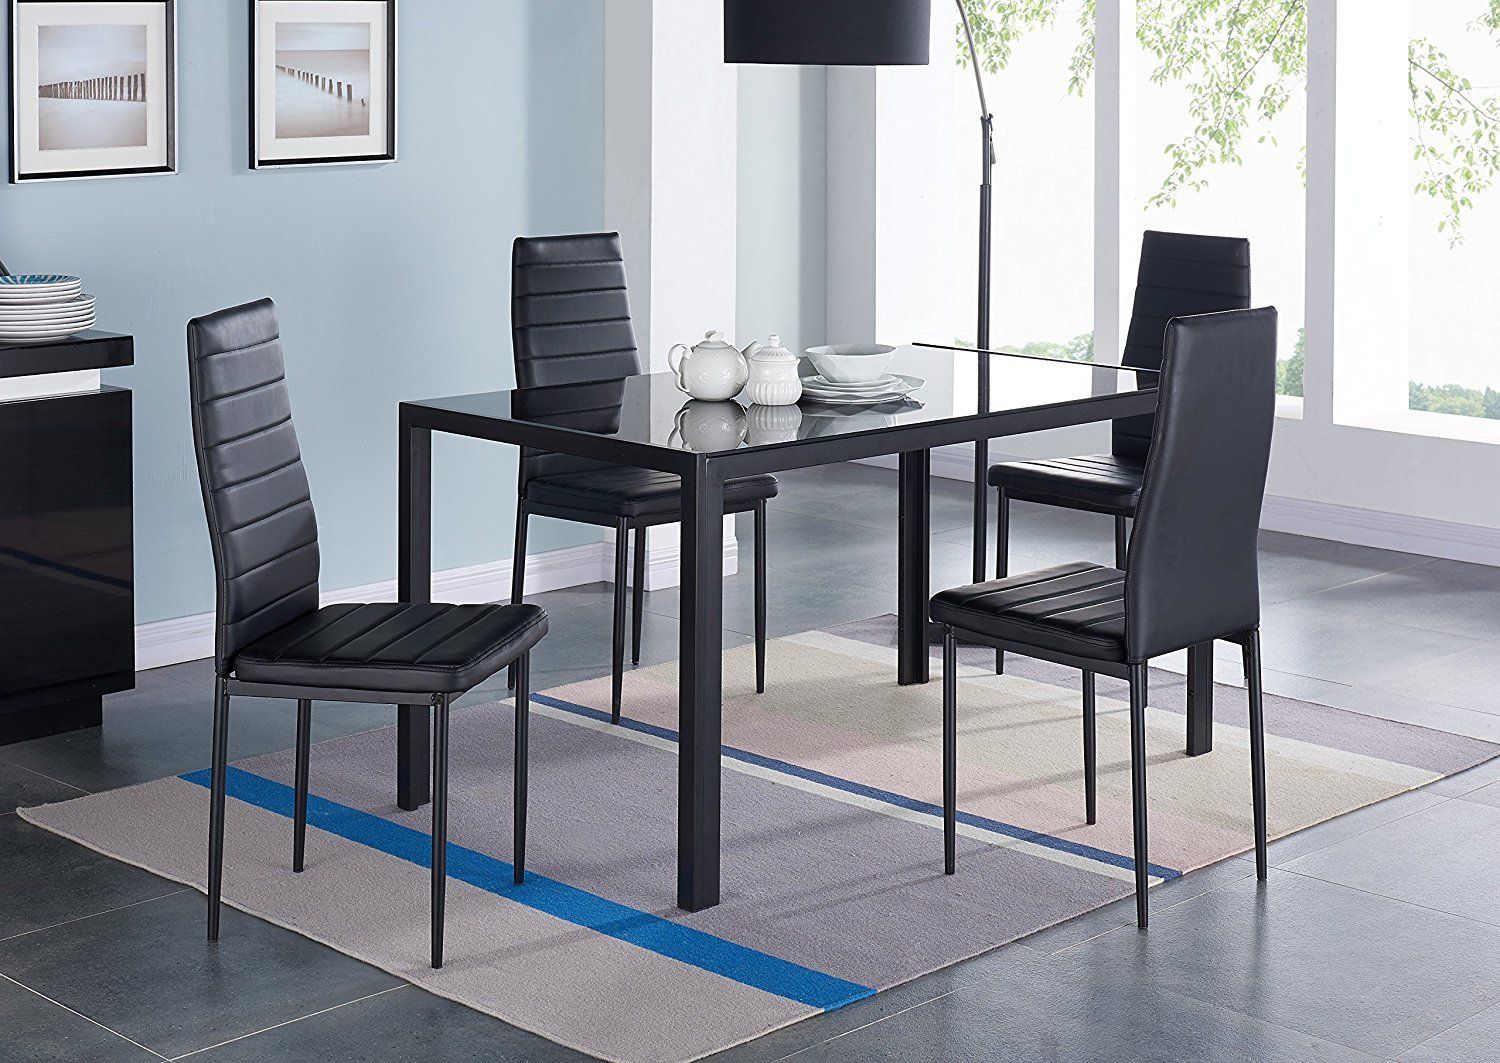 Compact 5 Piece Dining Set Regarding Most Up To Date Maynard 5 Piece Dining Sets (View 8 of 20)